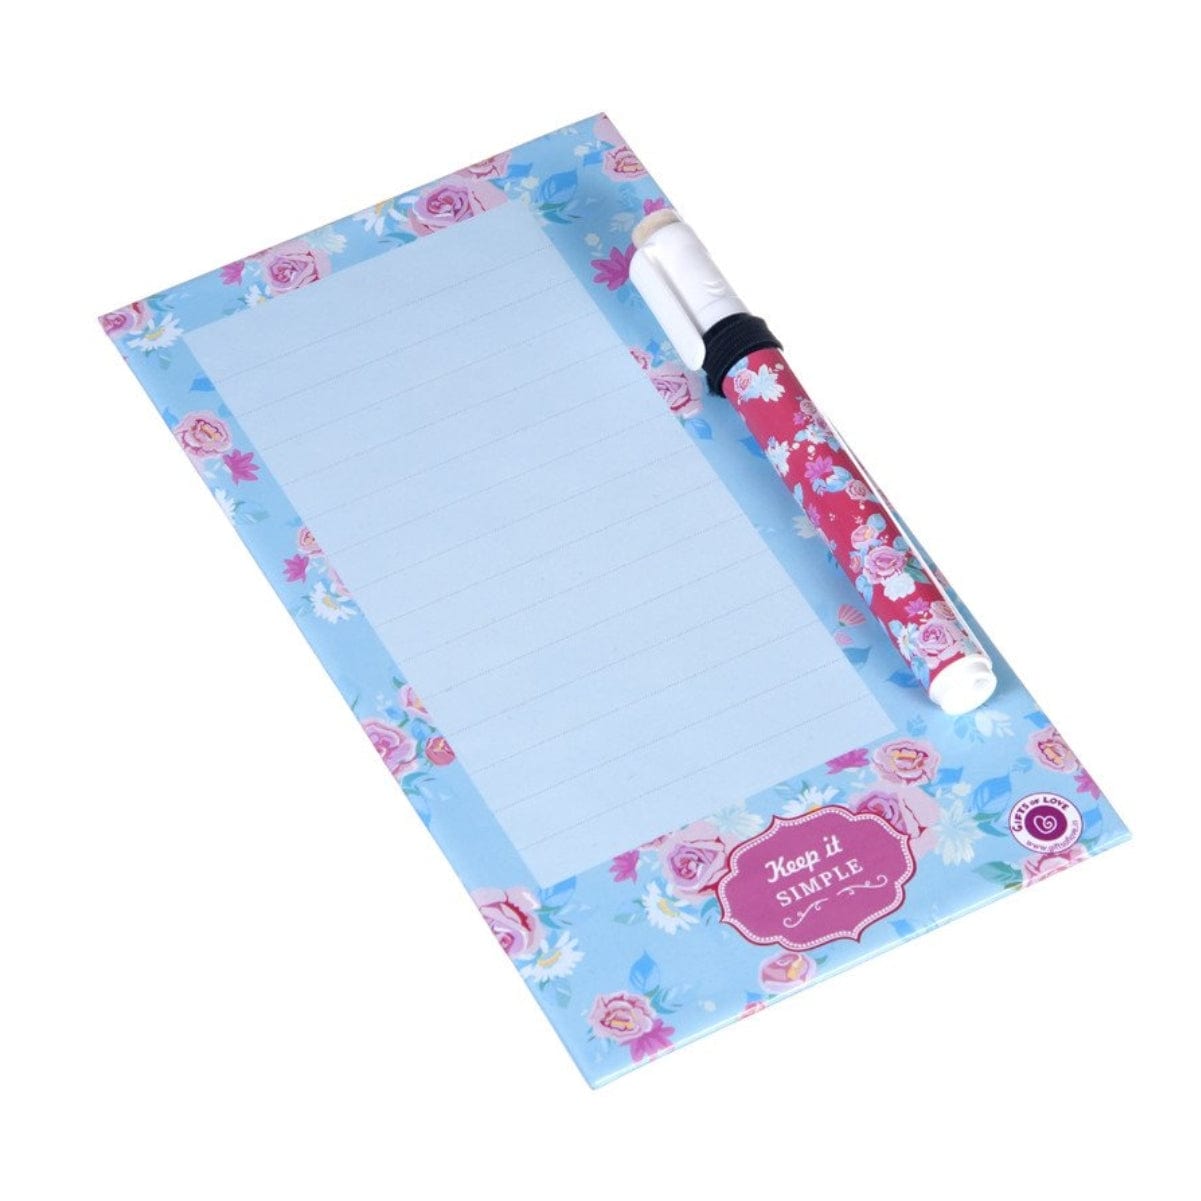 Gifts of Love Rewritable Dry Erase Board Esther Rose